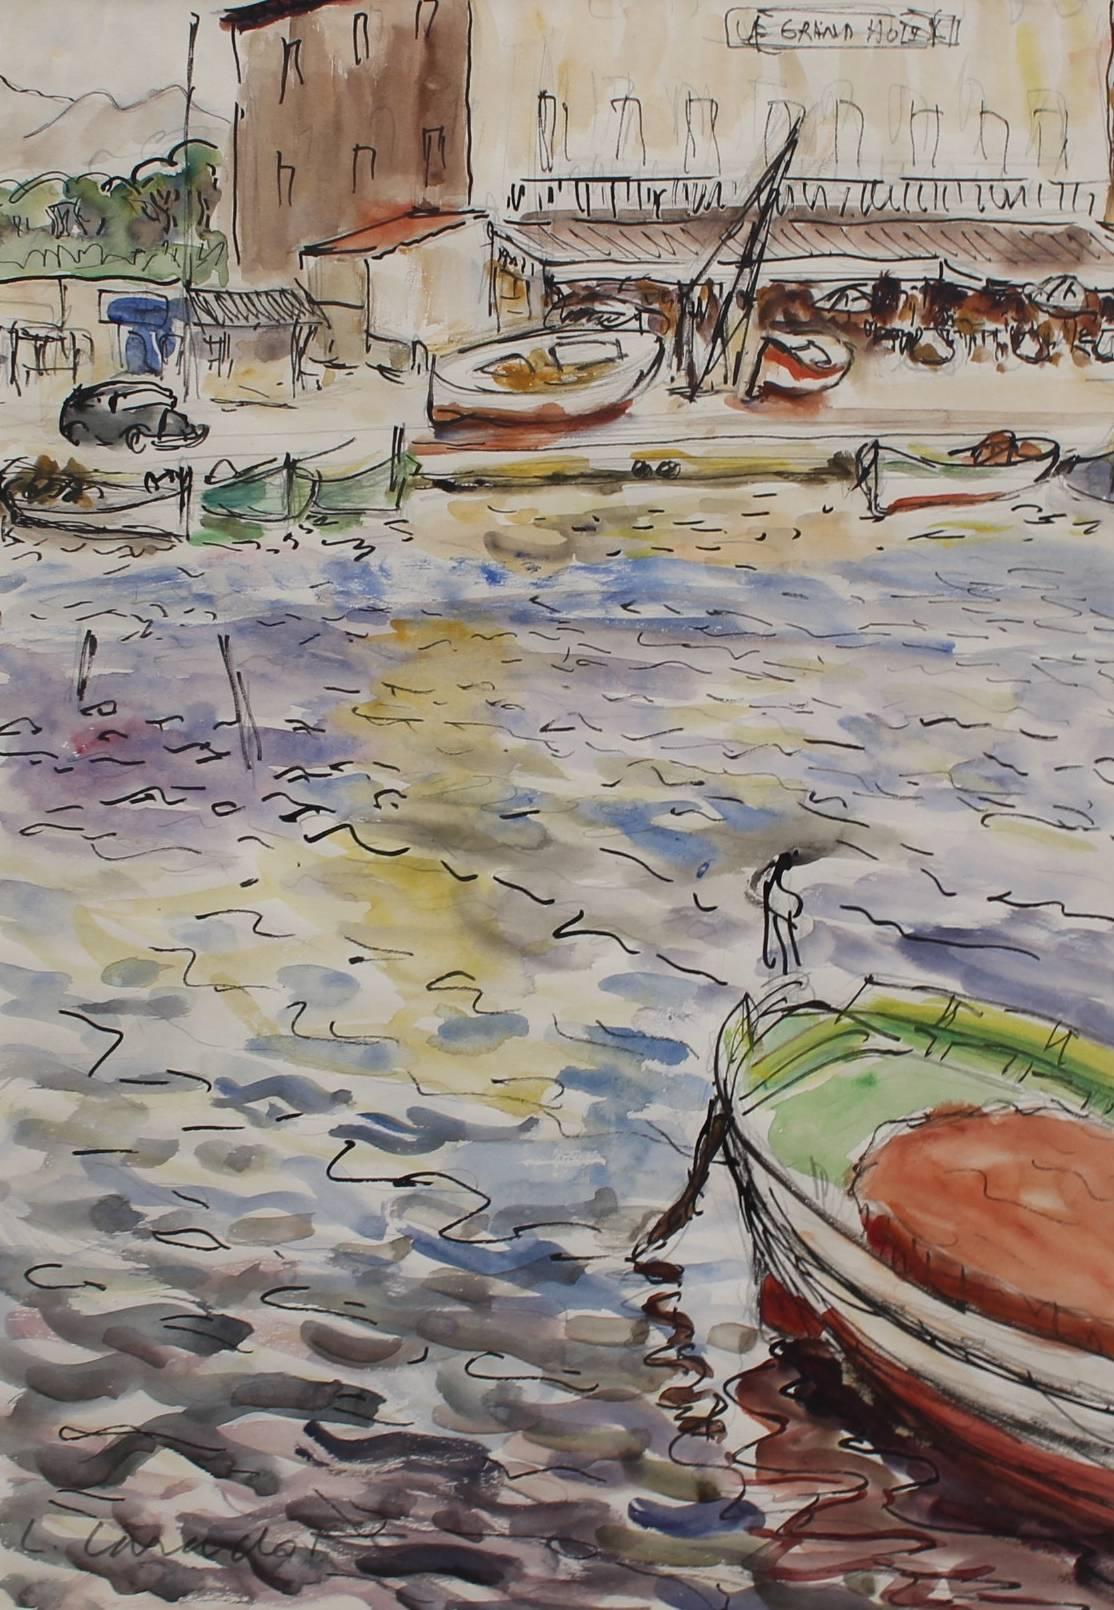 'French Riviera Port', watercolour on paper, by Louis Caradot (1896 - 1980). This expressive work depicts a small, sleepy port of the French Riviera seemingly before the glitz and glamour arrived with Brigitte Bardot and other international figures.